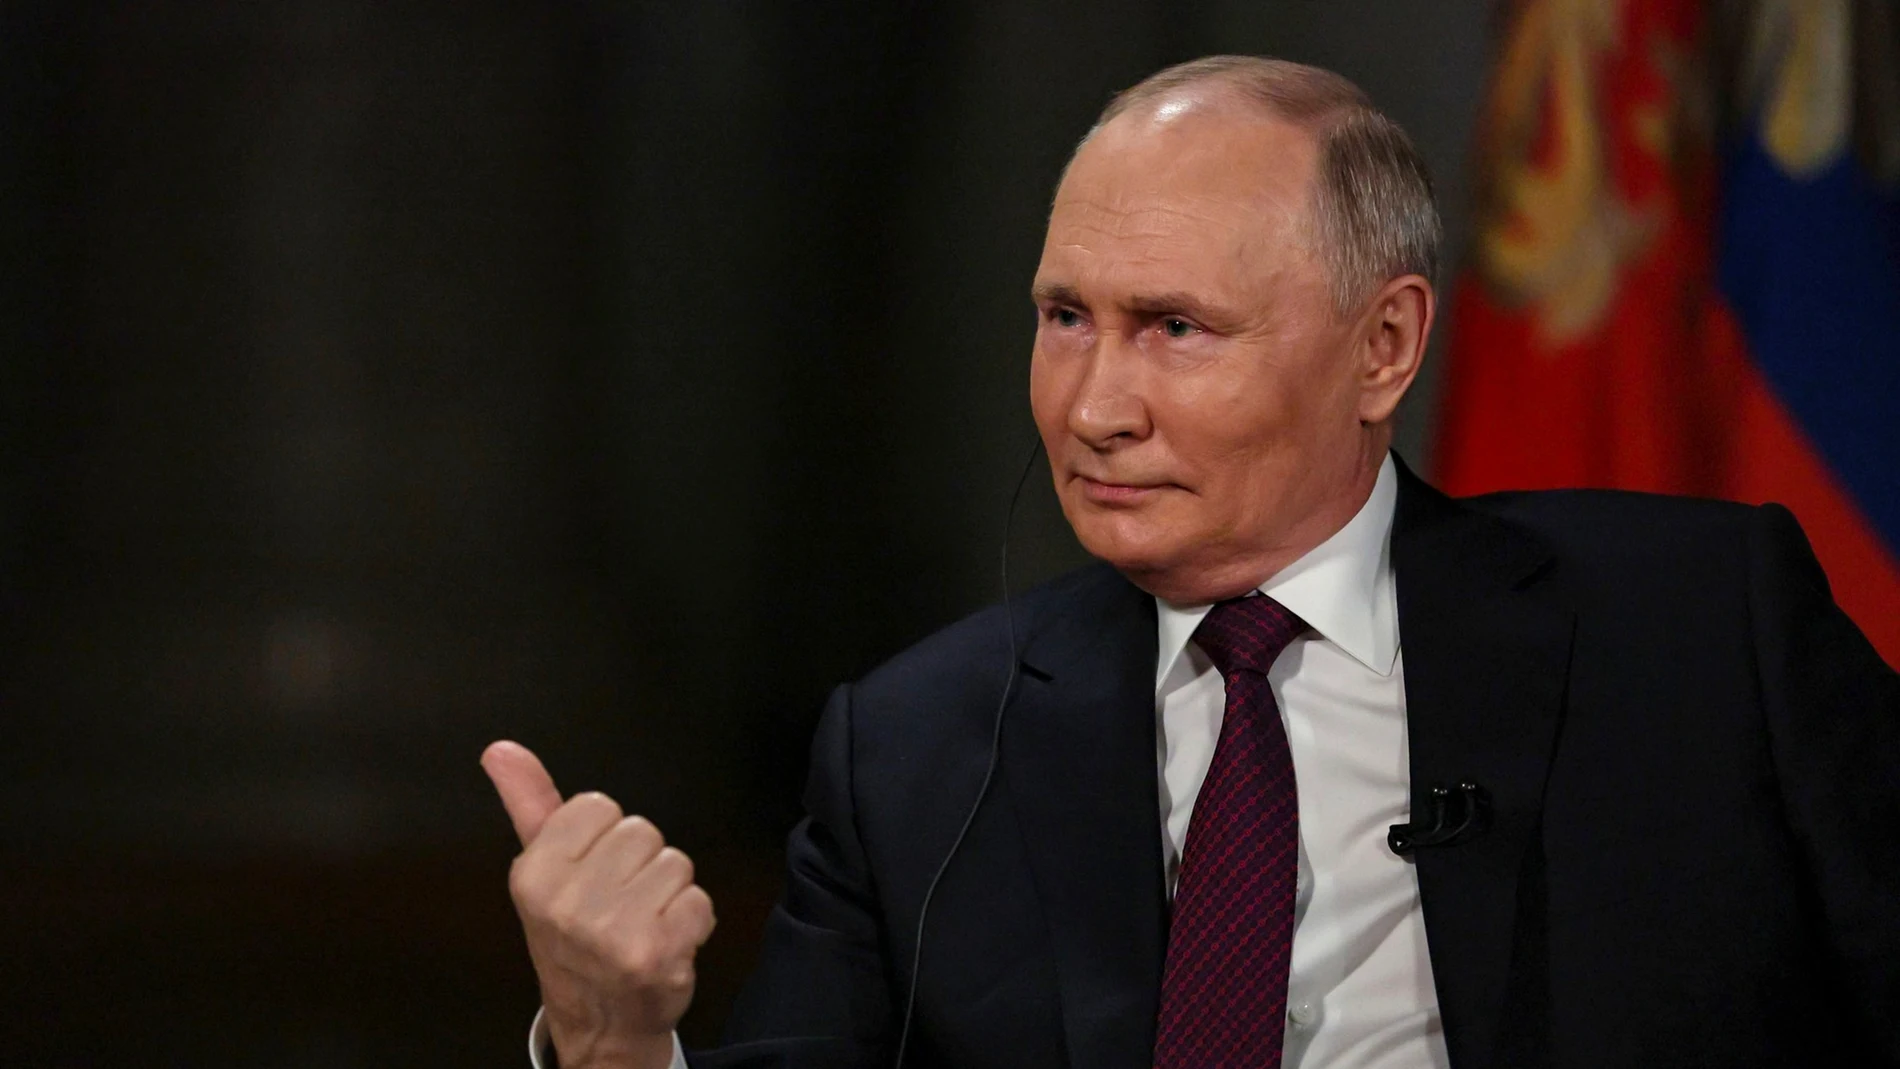 February 9, 2024, Moscow, Russia: Russian President Vladimir Putin, right, responds to a question from conservative television personality Tucker Carlson during an interview at the Kremlin, February 9, 2024 in Moscow, Russia. 09/02/2024